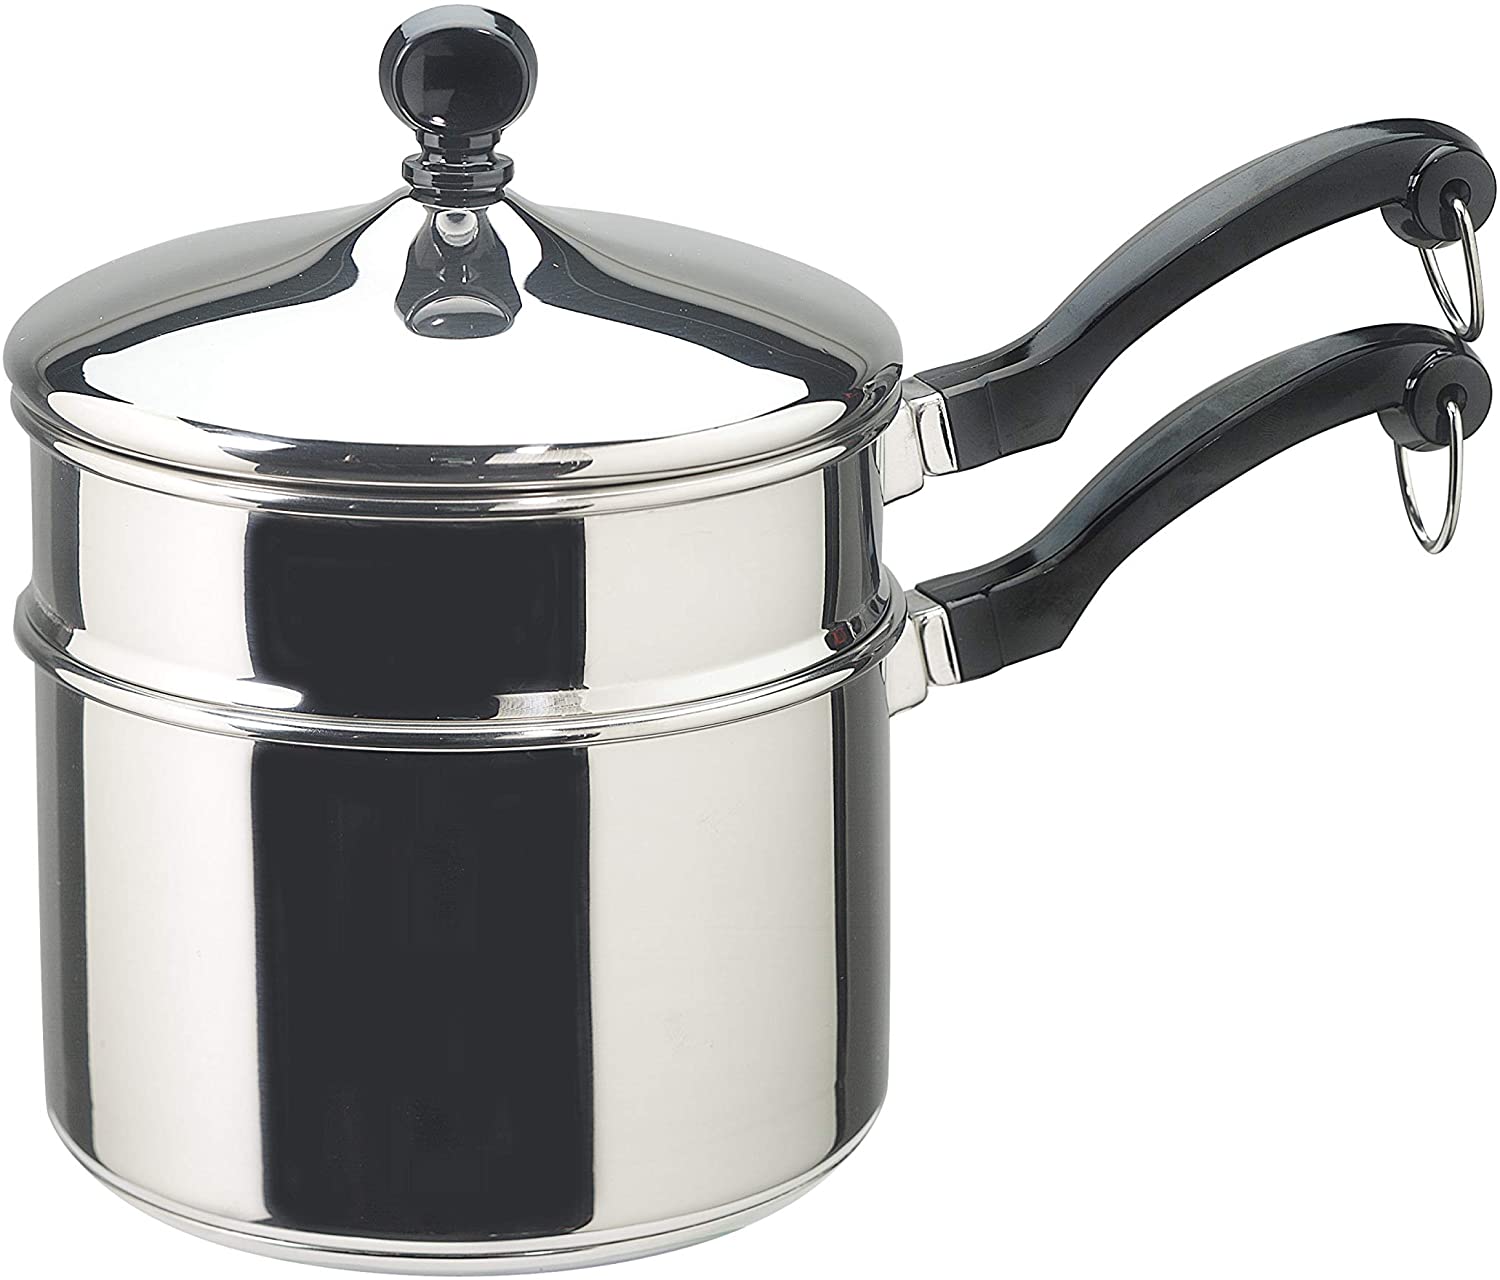 Farberware Classic Stainless Series Covered Double Boiler, 2-Quart